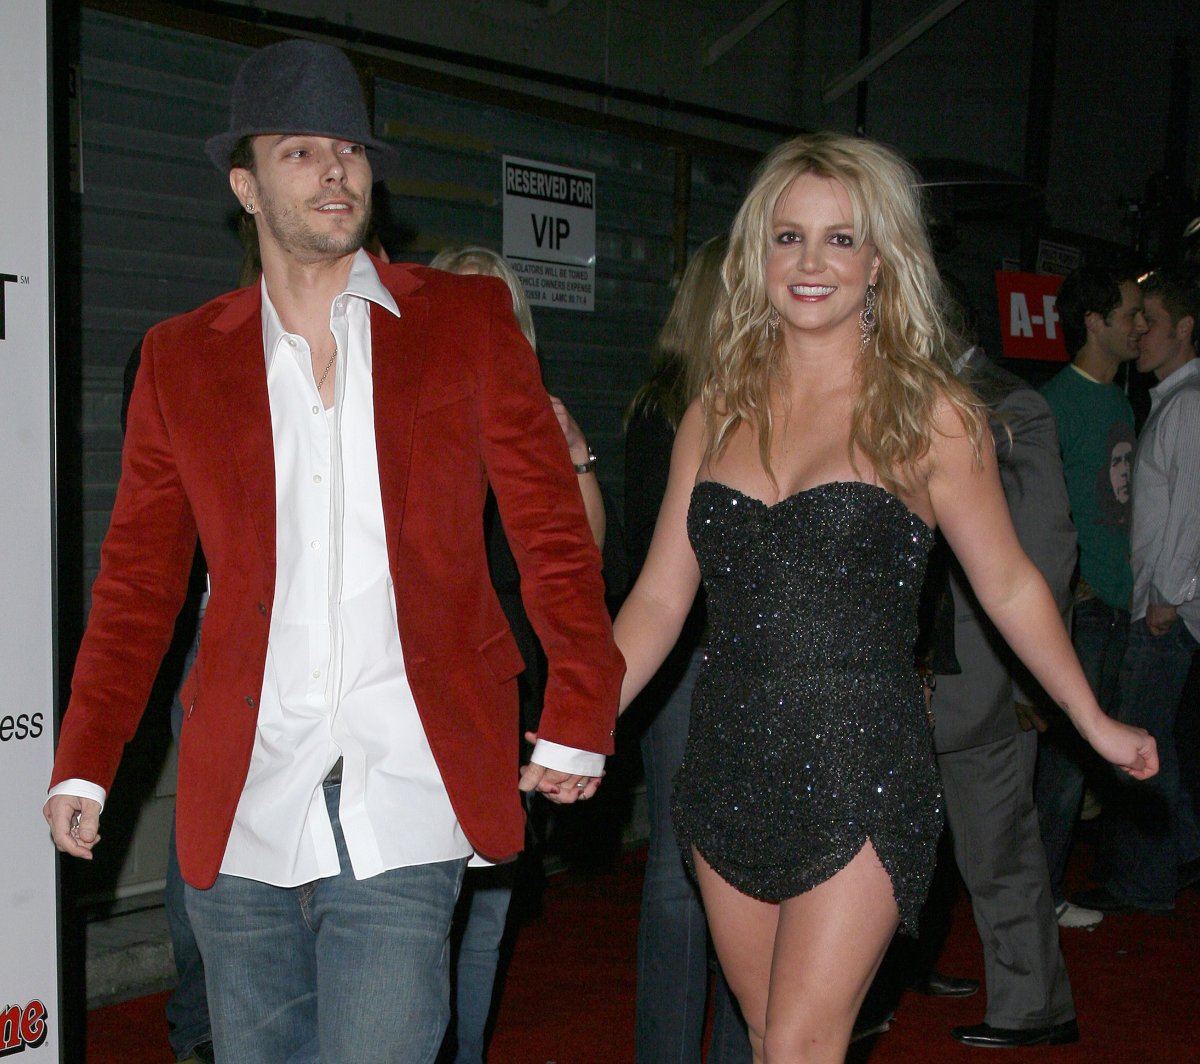 Britney Spears and Kevin Federline while married